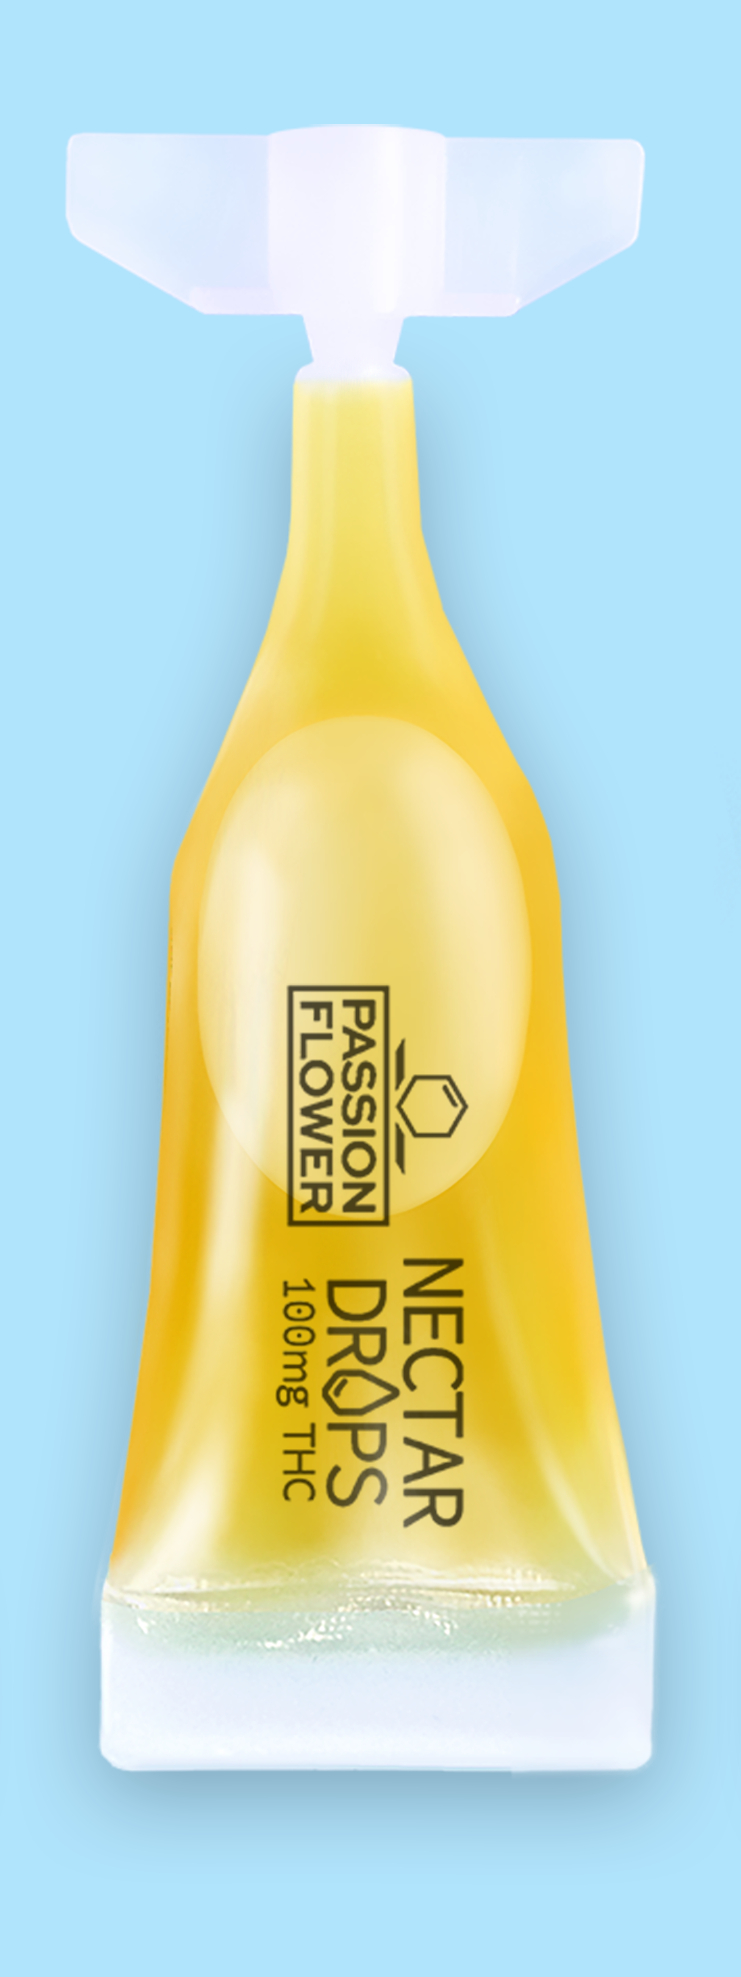 Passion Nectar Drops Live Resin Blueberry